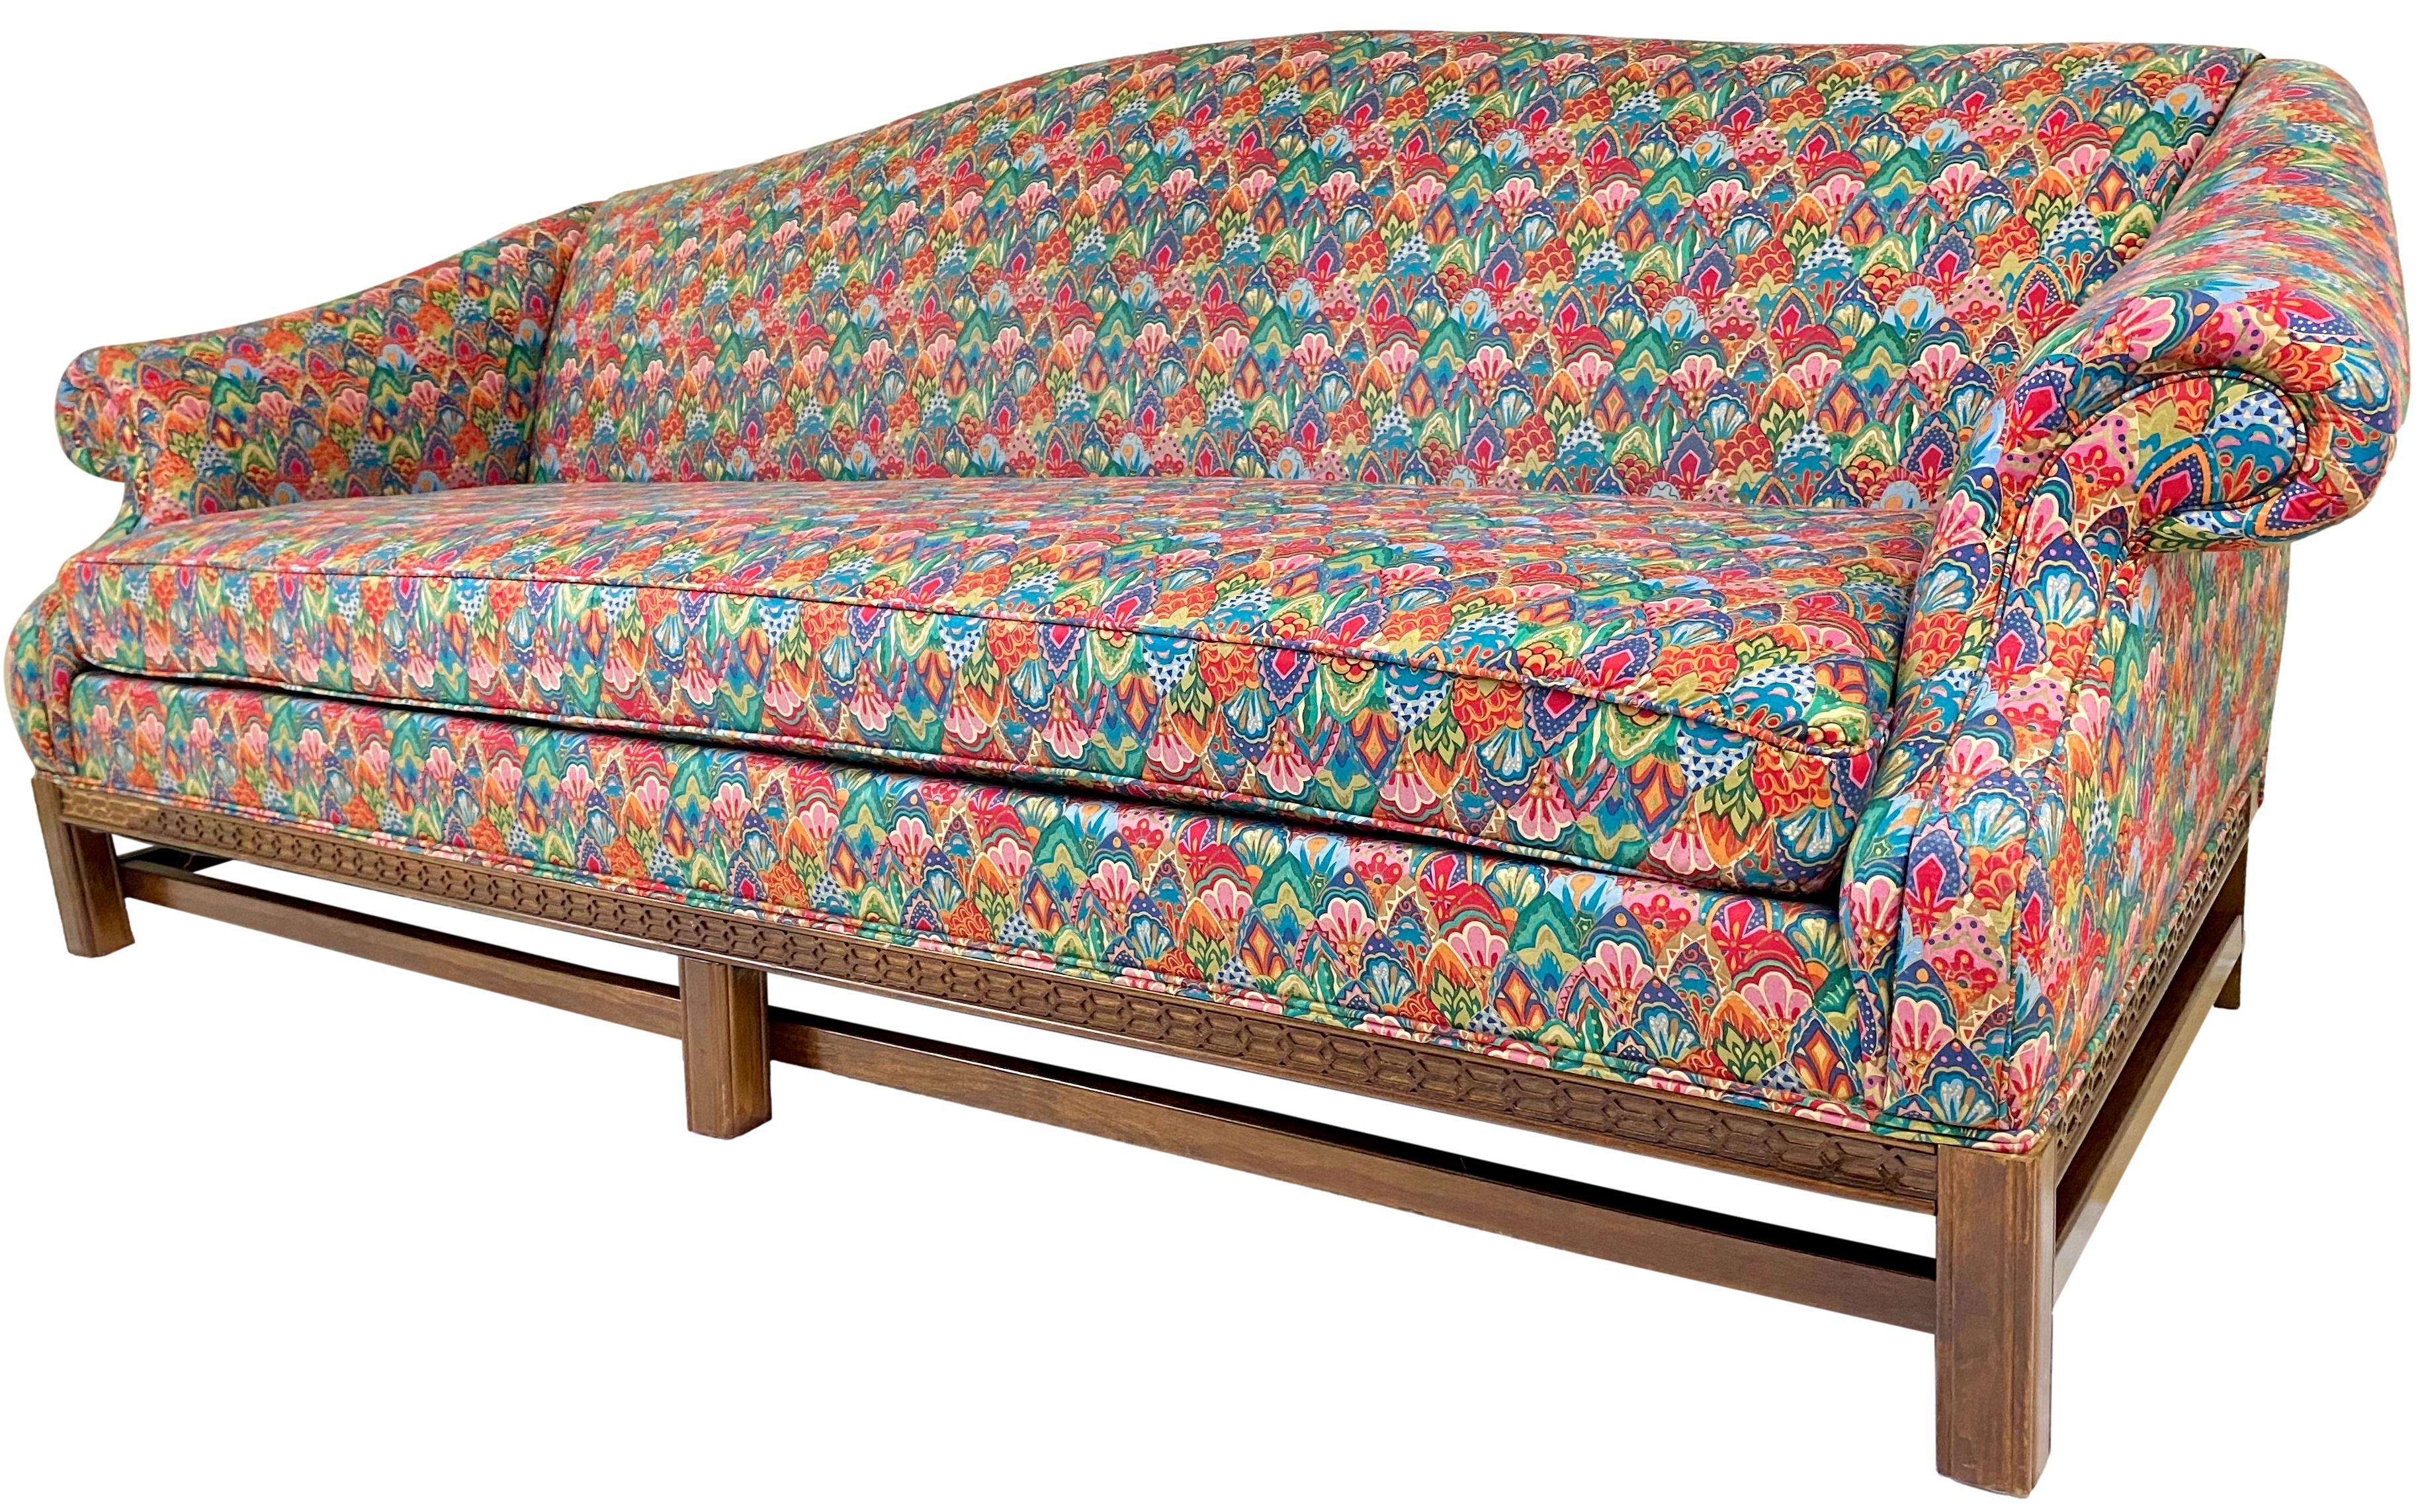 A late 20th century Chippendale style custom upholstered camelback sofa. Mahogany wood frame with lattice detail edging and Marlborough legs; upholstered in brightly patterned chintz (zippered, flippable cushion).

Dimensions: 86